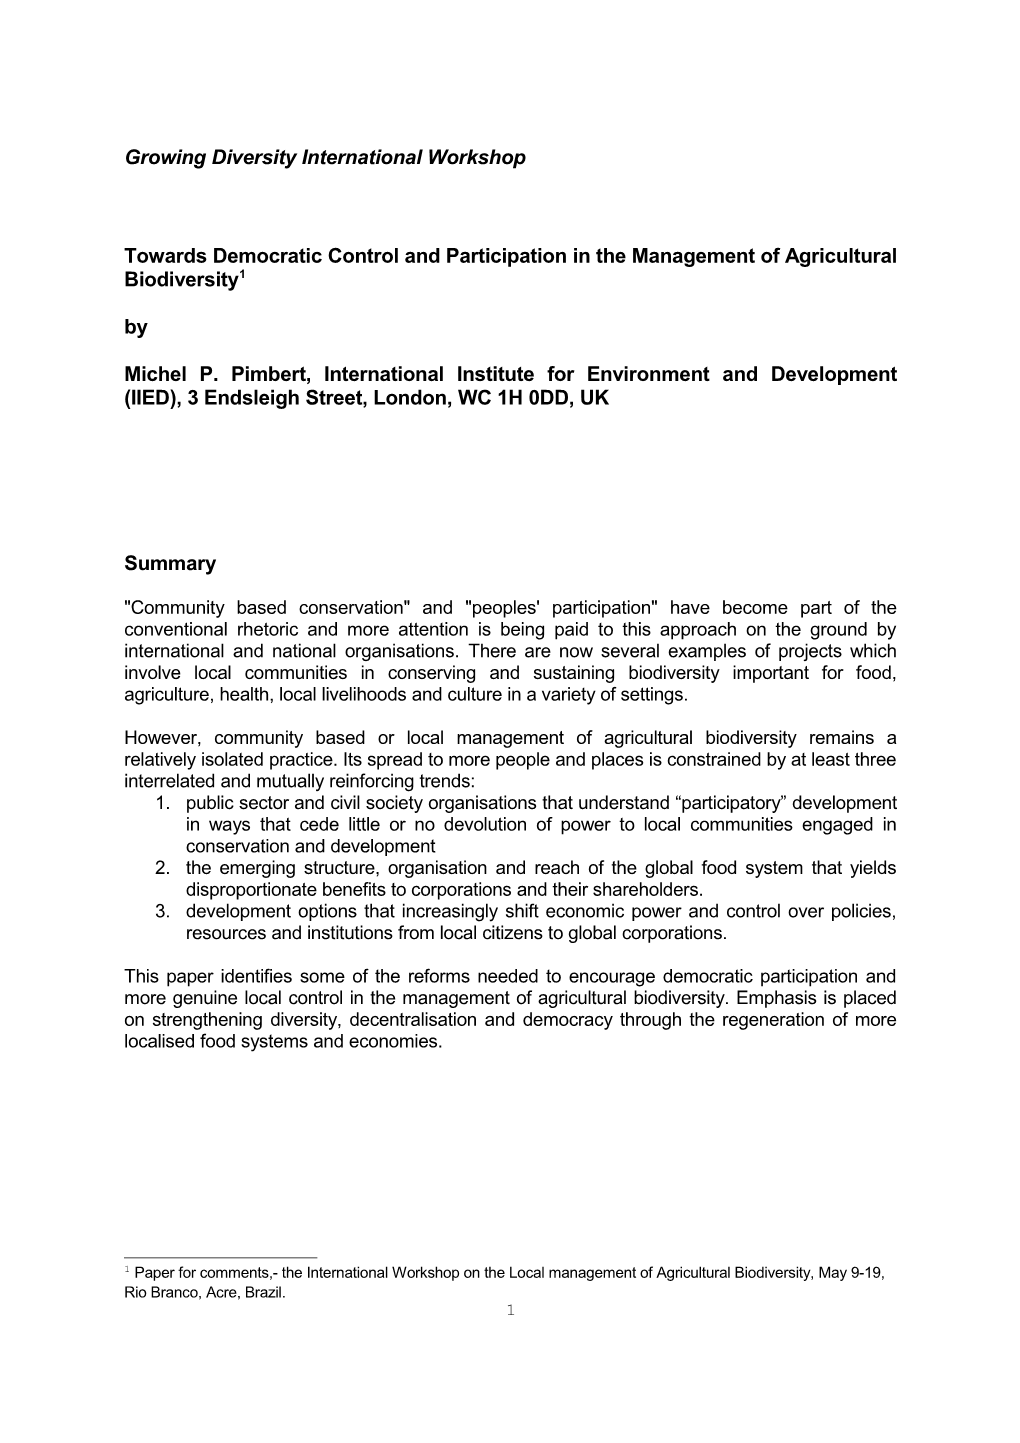 Paper for the UNESCO-IIPA Regional Workshop on Community-Based Conservation, February 9-12